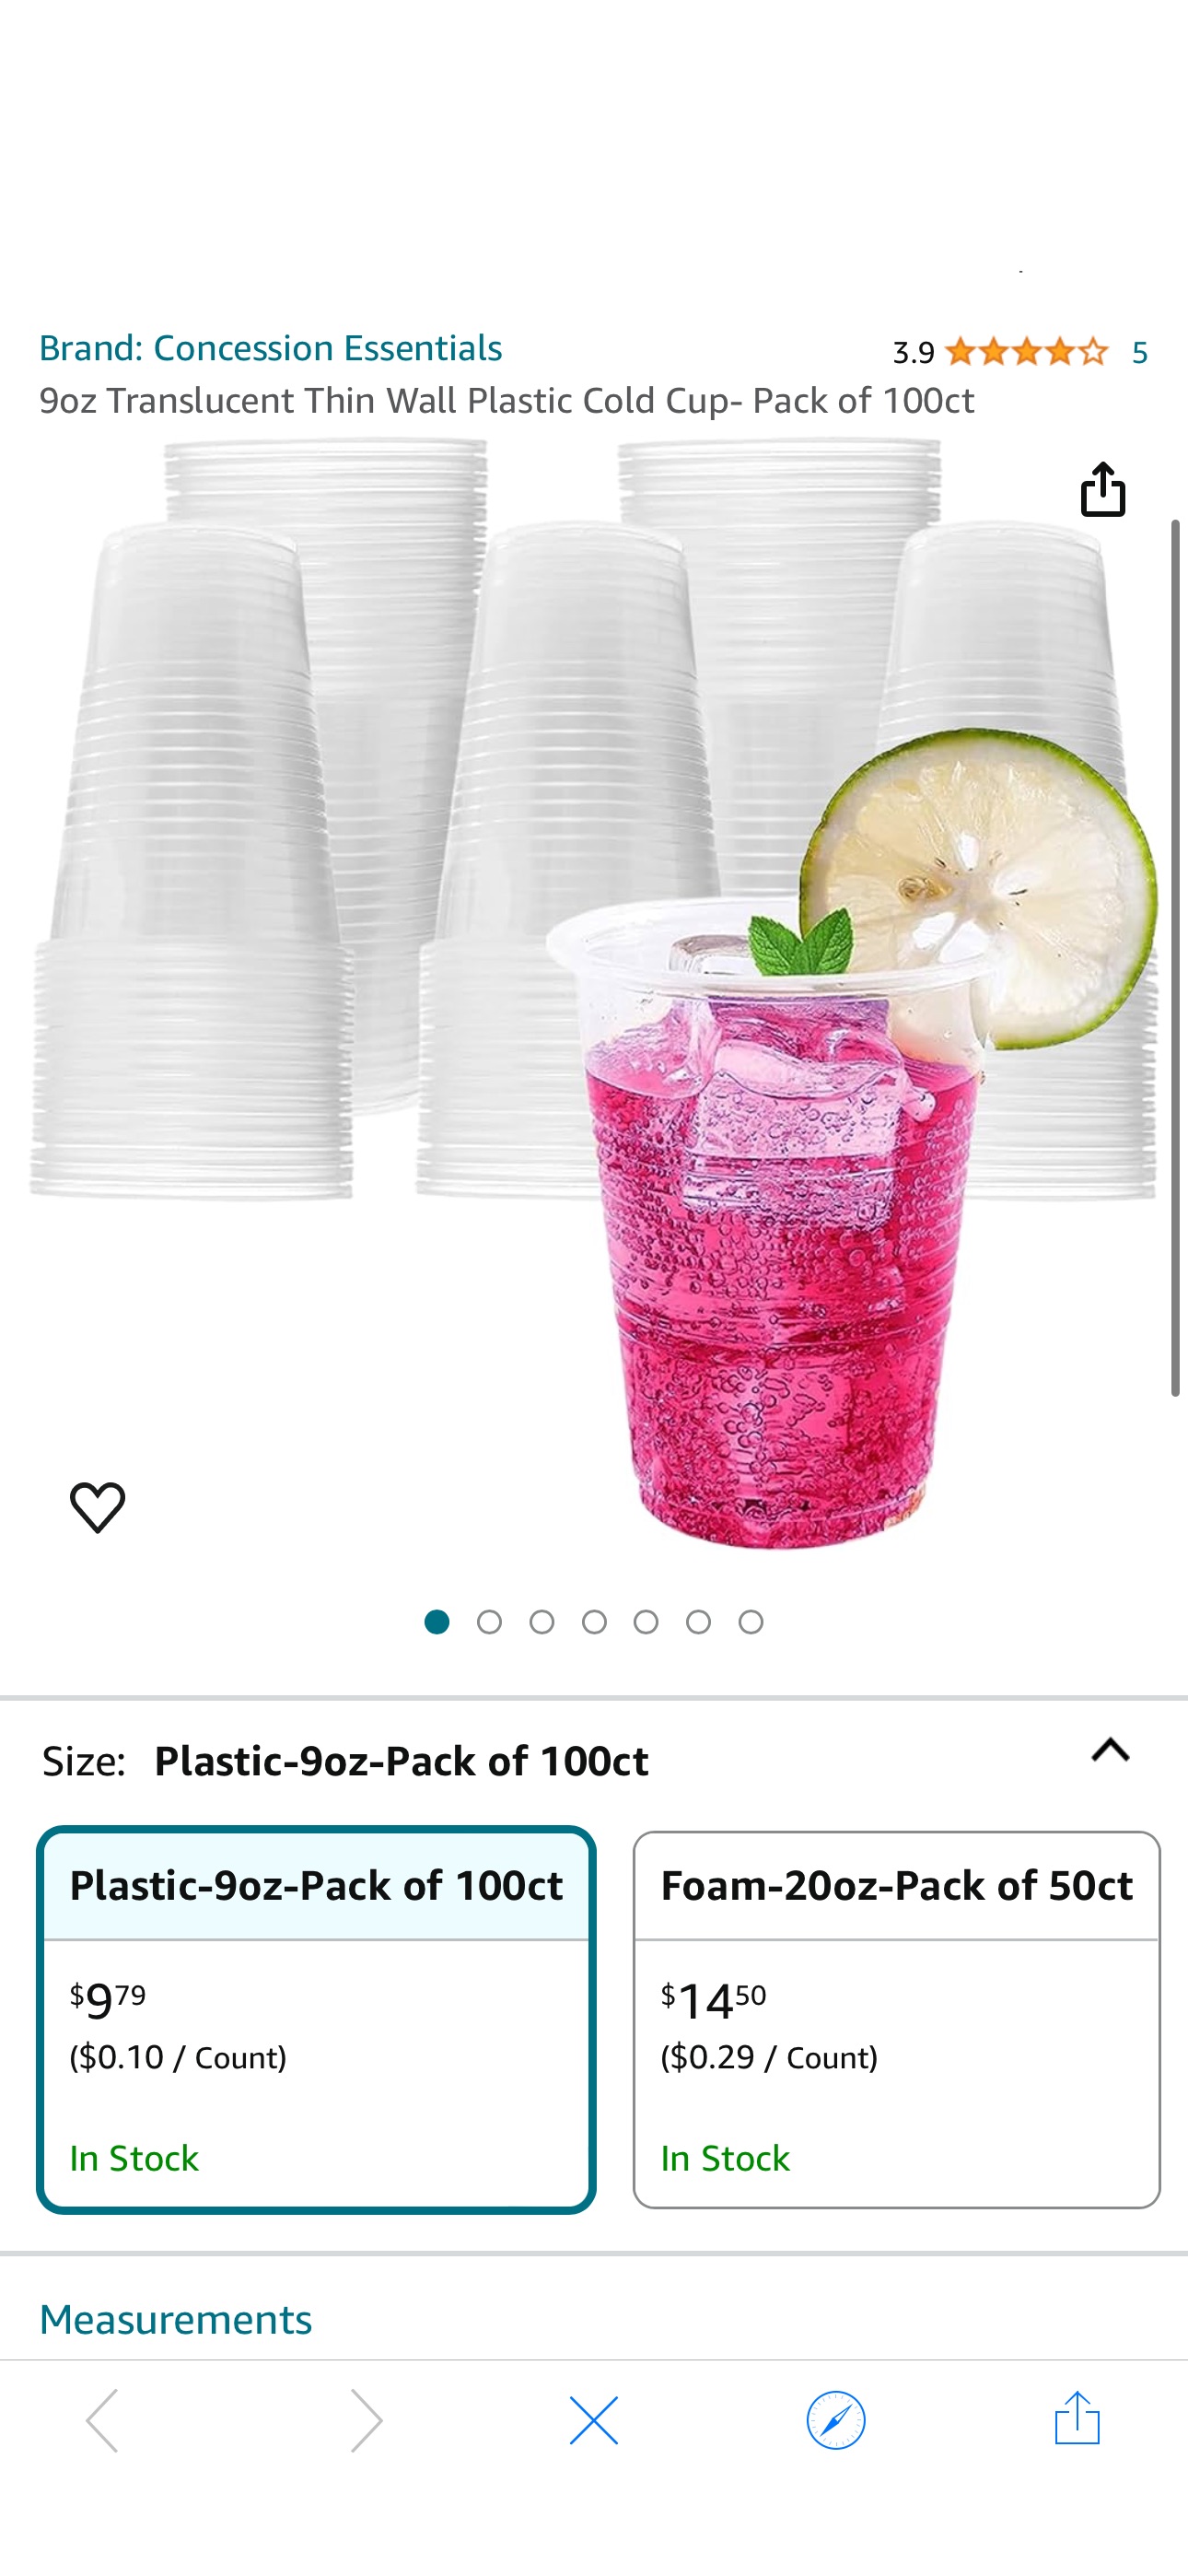 Amazon.com: Concession Essentials 9oz Translucent Thin Wall Plastic Cold Cup- Pack of 100ct : Health & Household